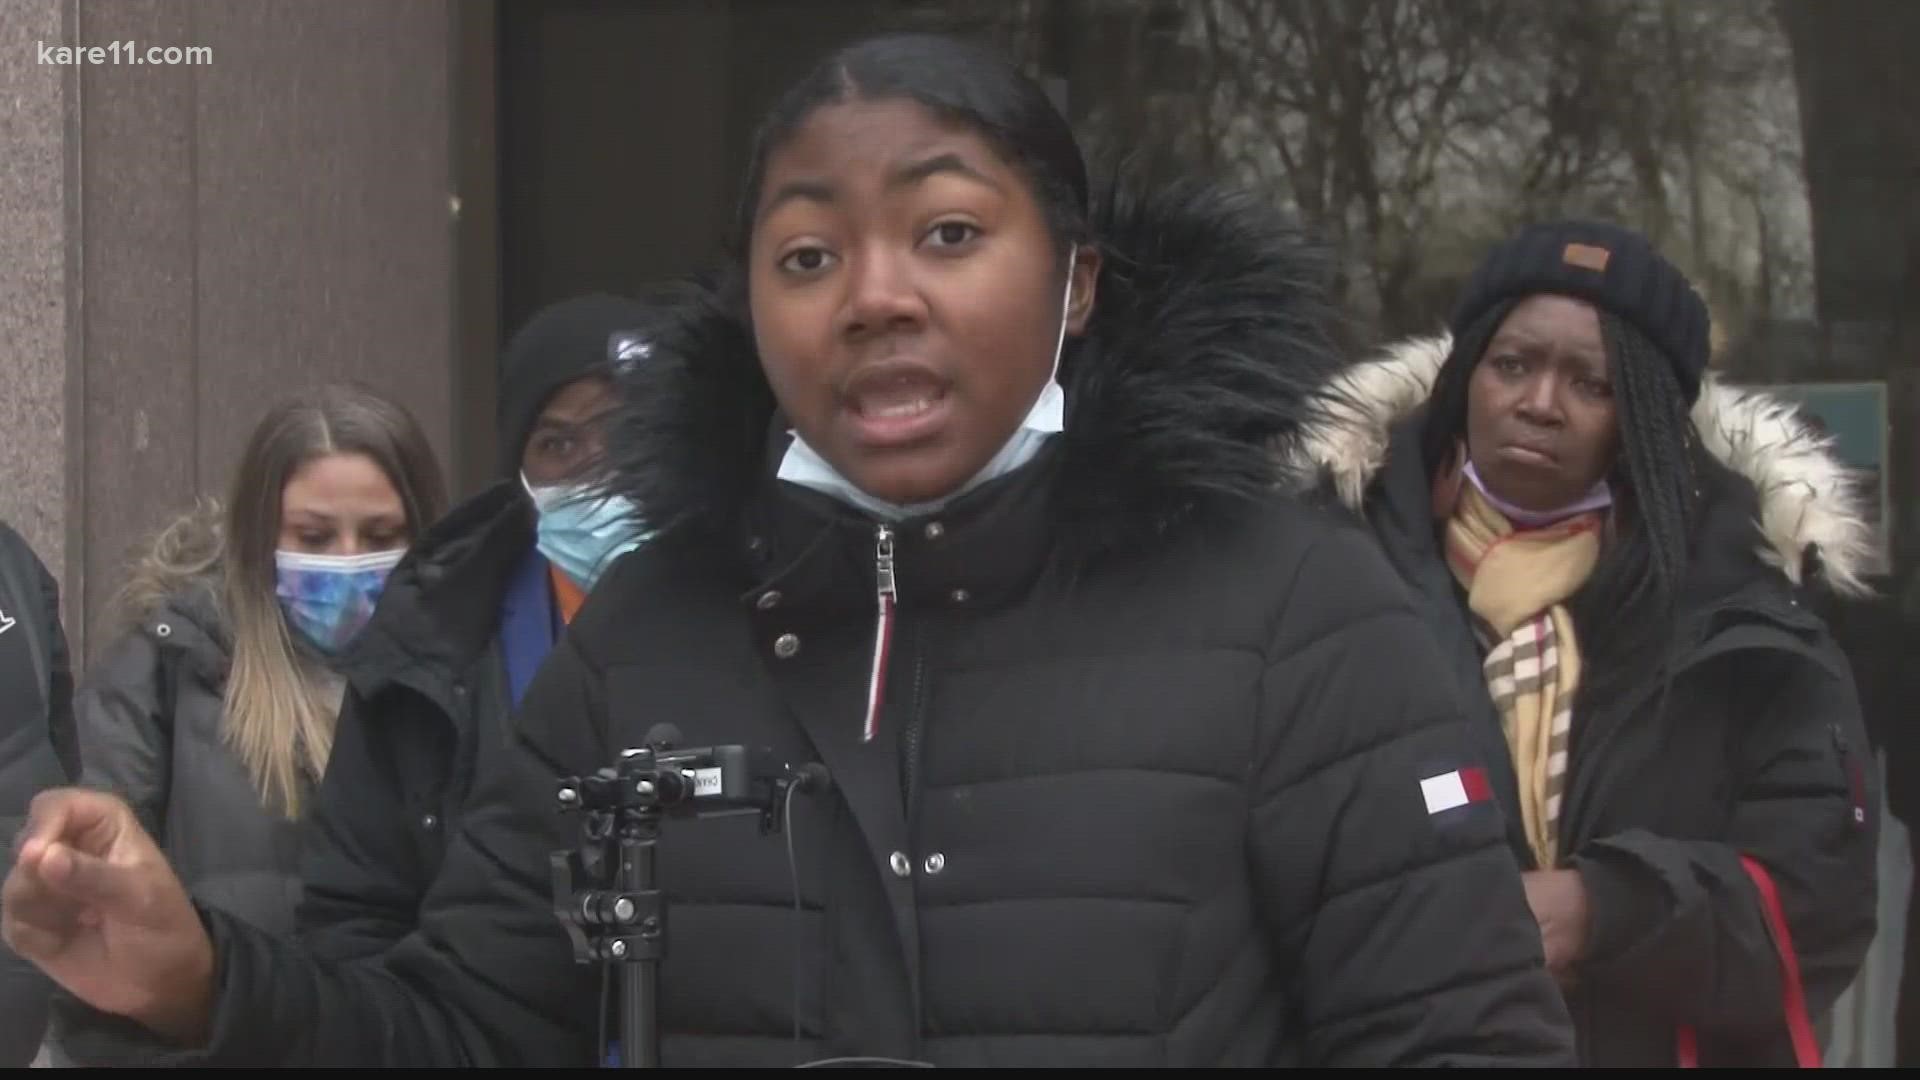 "Stop killing," said 19-year-old Faith Allen outside the Hennepin County Government Center. "Killing has been hurting Minneapolis for years."